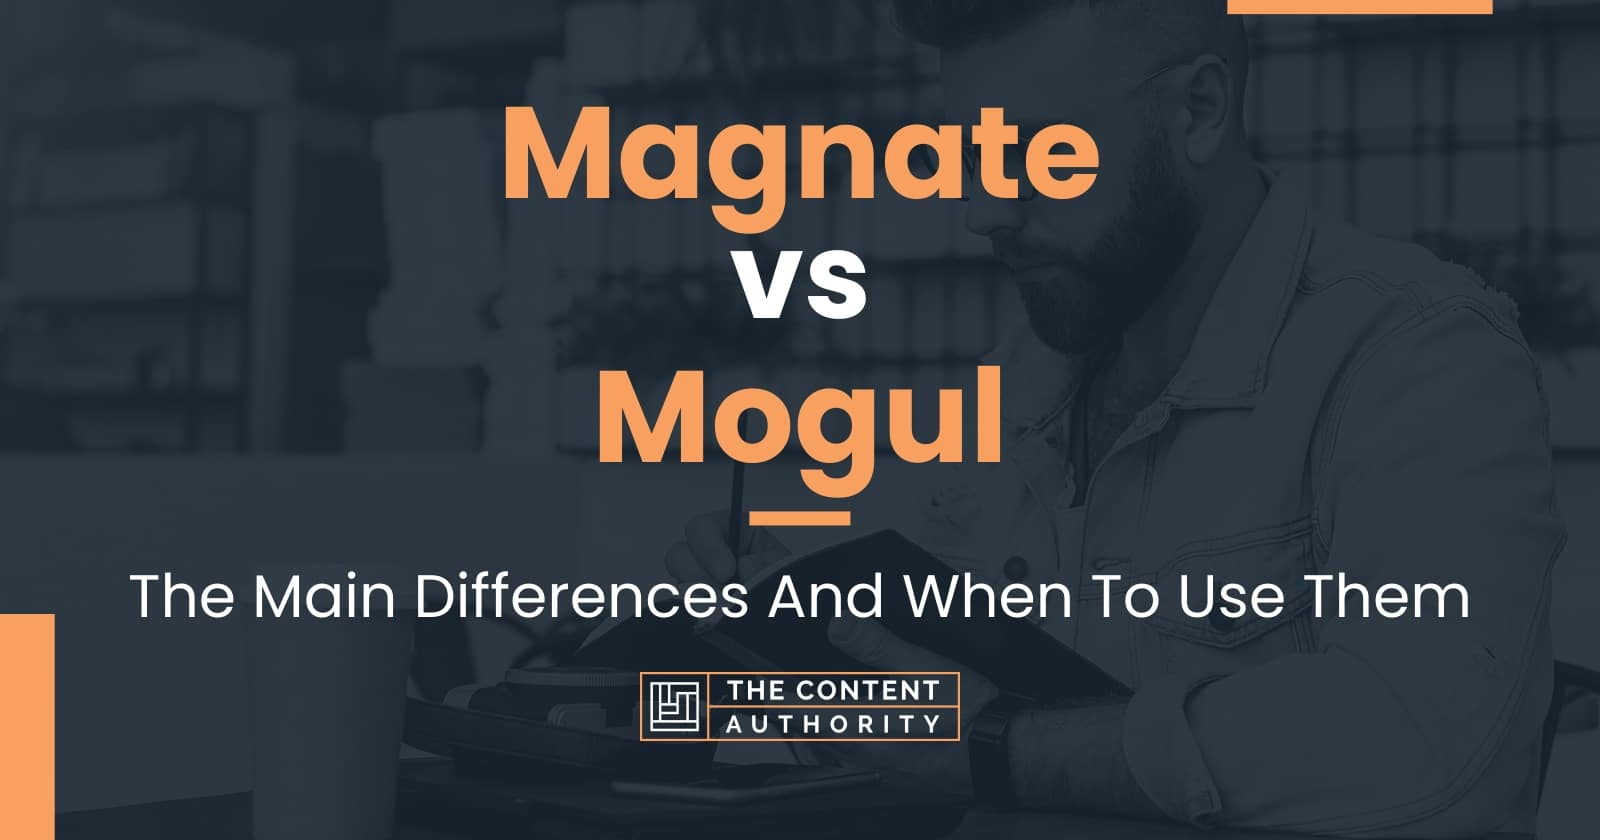 🆚What is the difference between Magnate and Tycoon and Mogul